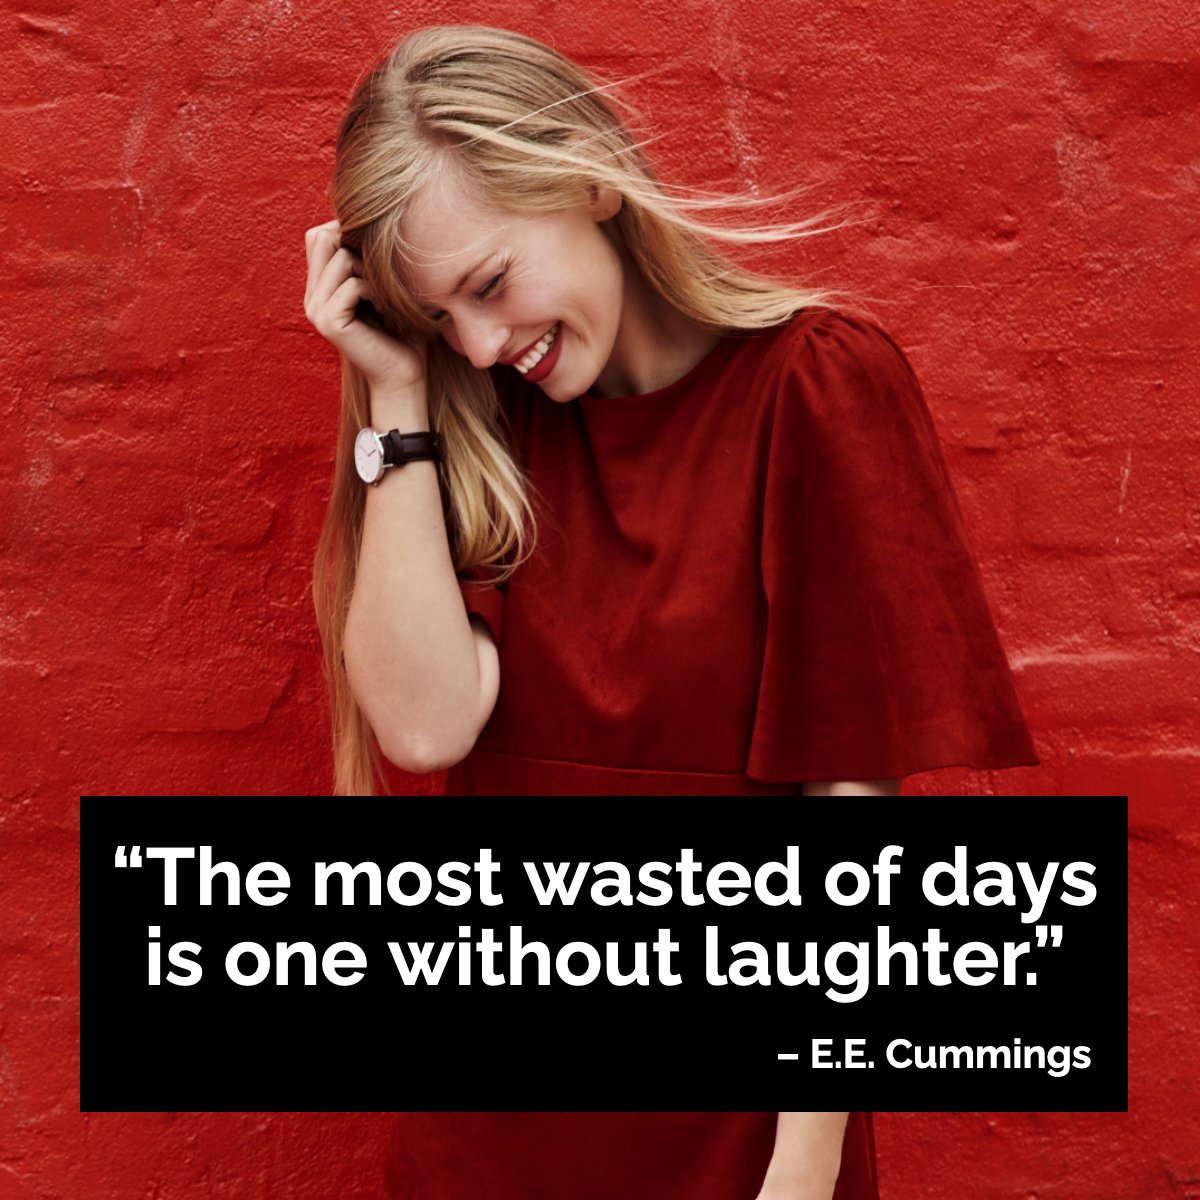 Laughter is one of the most valuable things in your life. 💯

#wisdomquote     #wisdomoftheday     #quotegram     #quoteoftheday      #eecummings
#Buyingahome #Sellingahome #Wisconsinrealestate